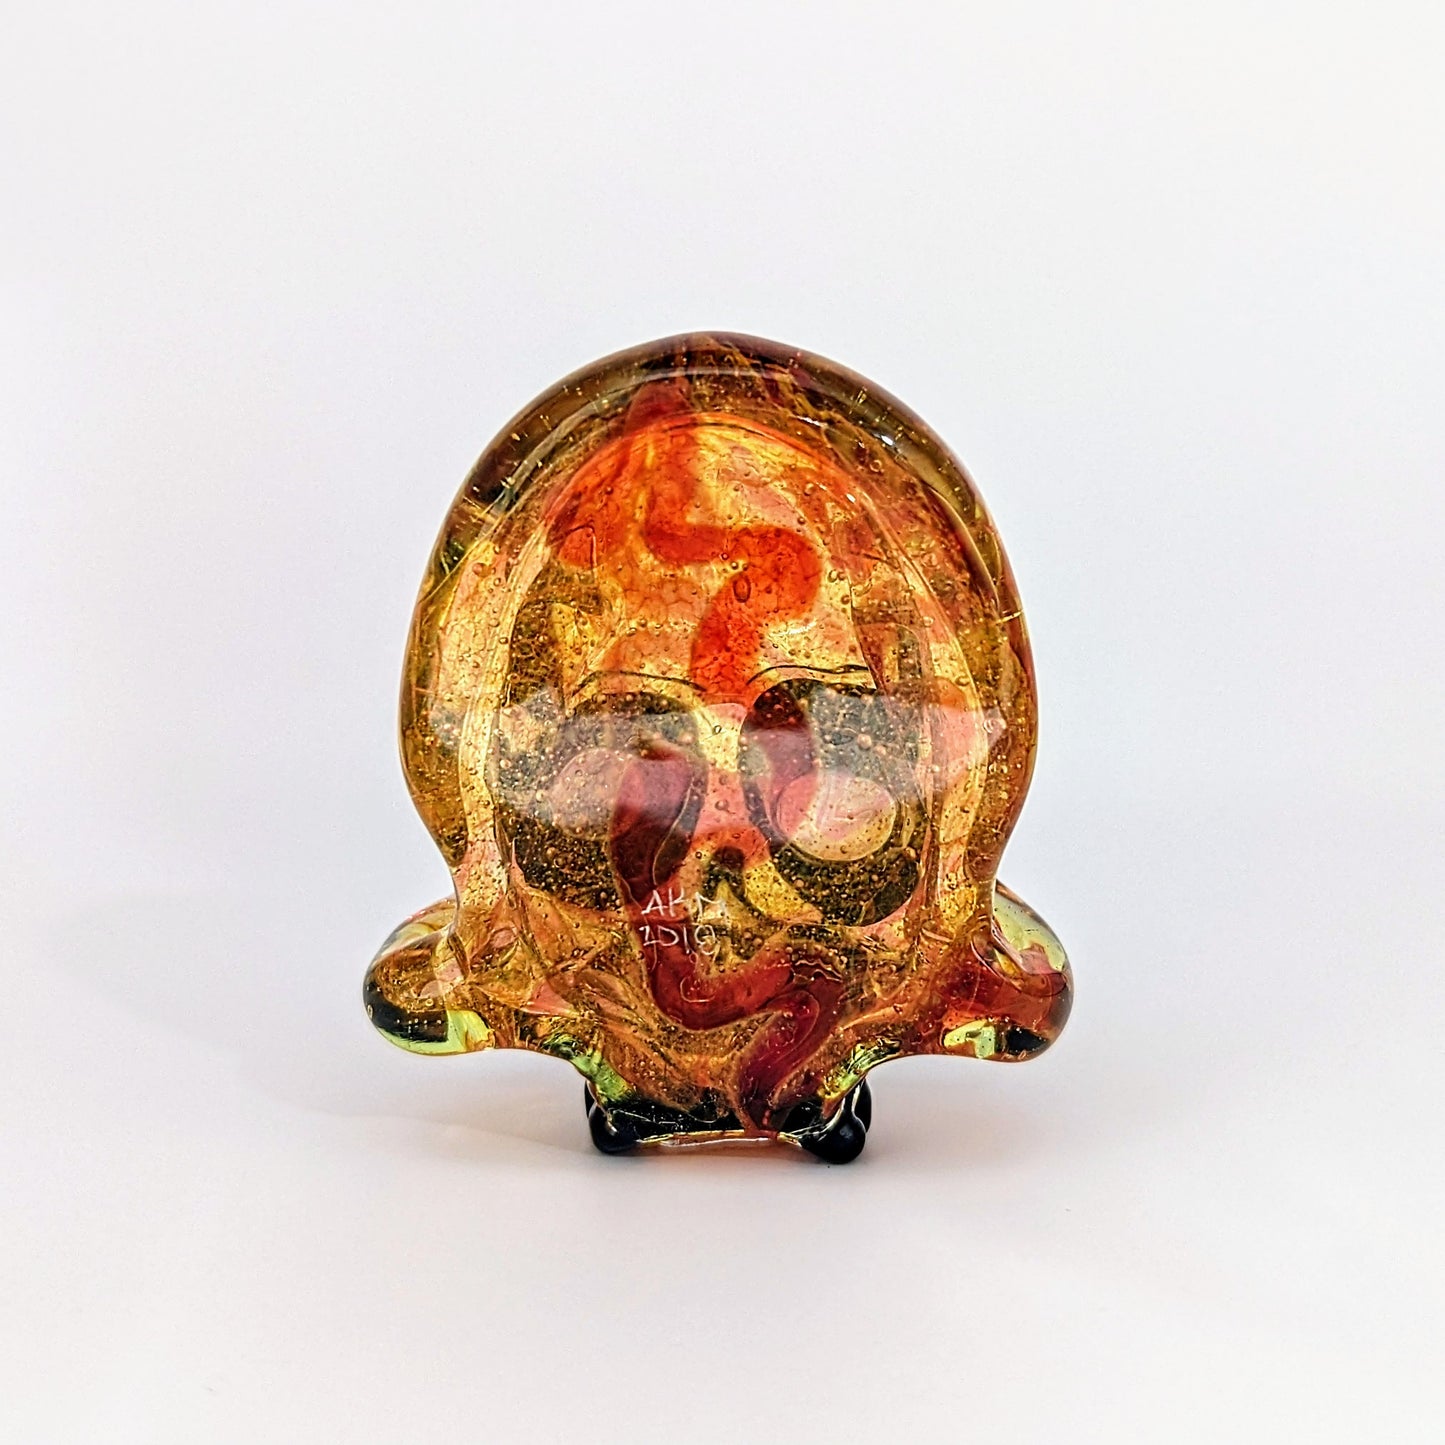 AKM  Skull, 2018 Borosilicate Glass Pendant with Opal Eyes Approx. 2.4 x 2.4 in  Hand blown glass made by AKM. Signed "AKM" + Dated "2018"